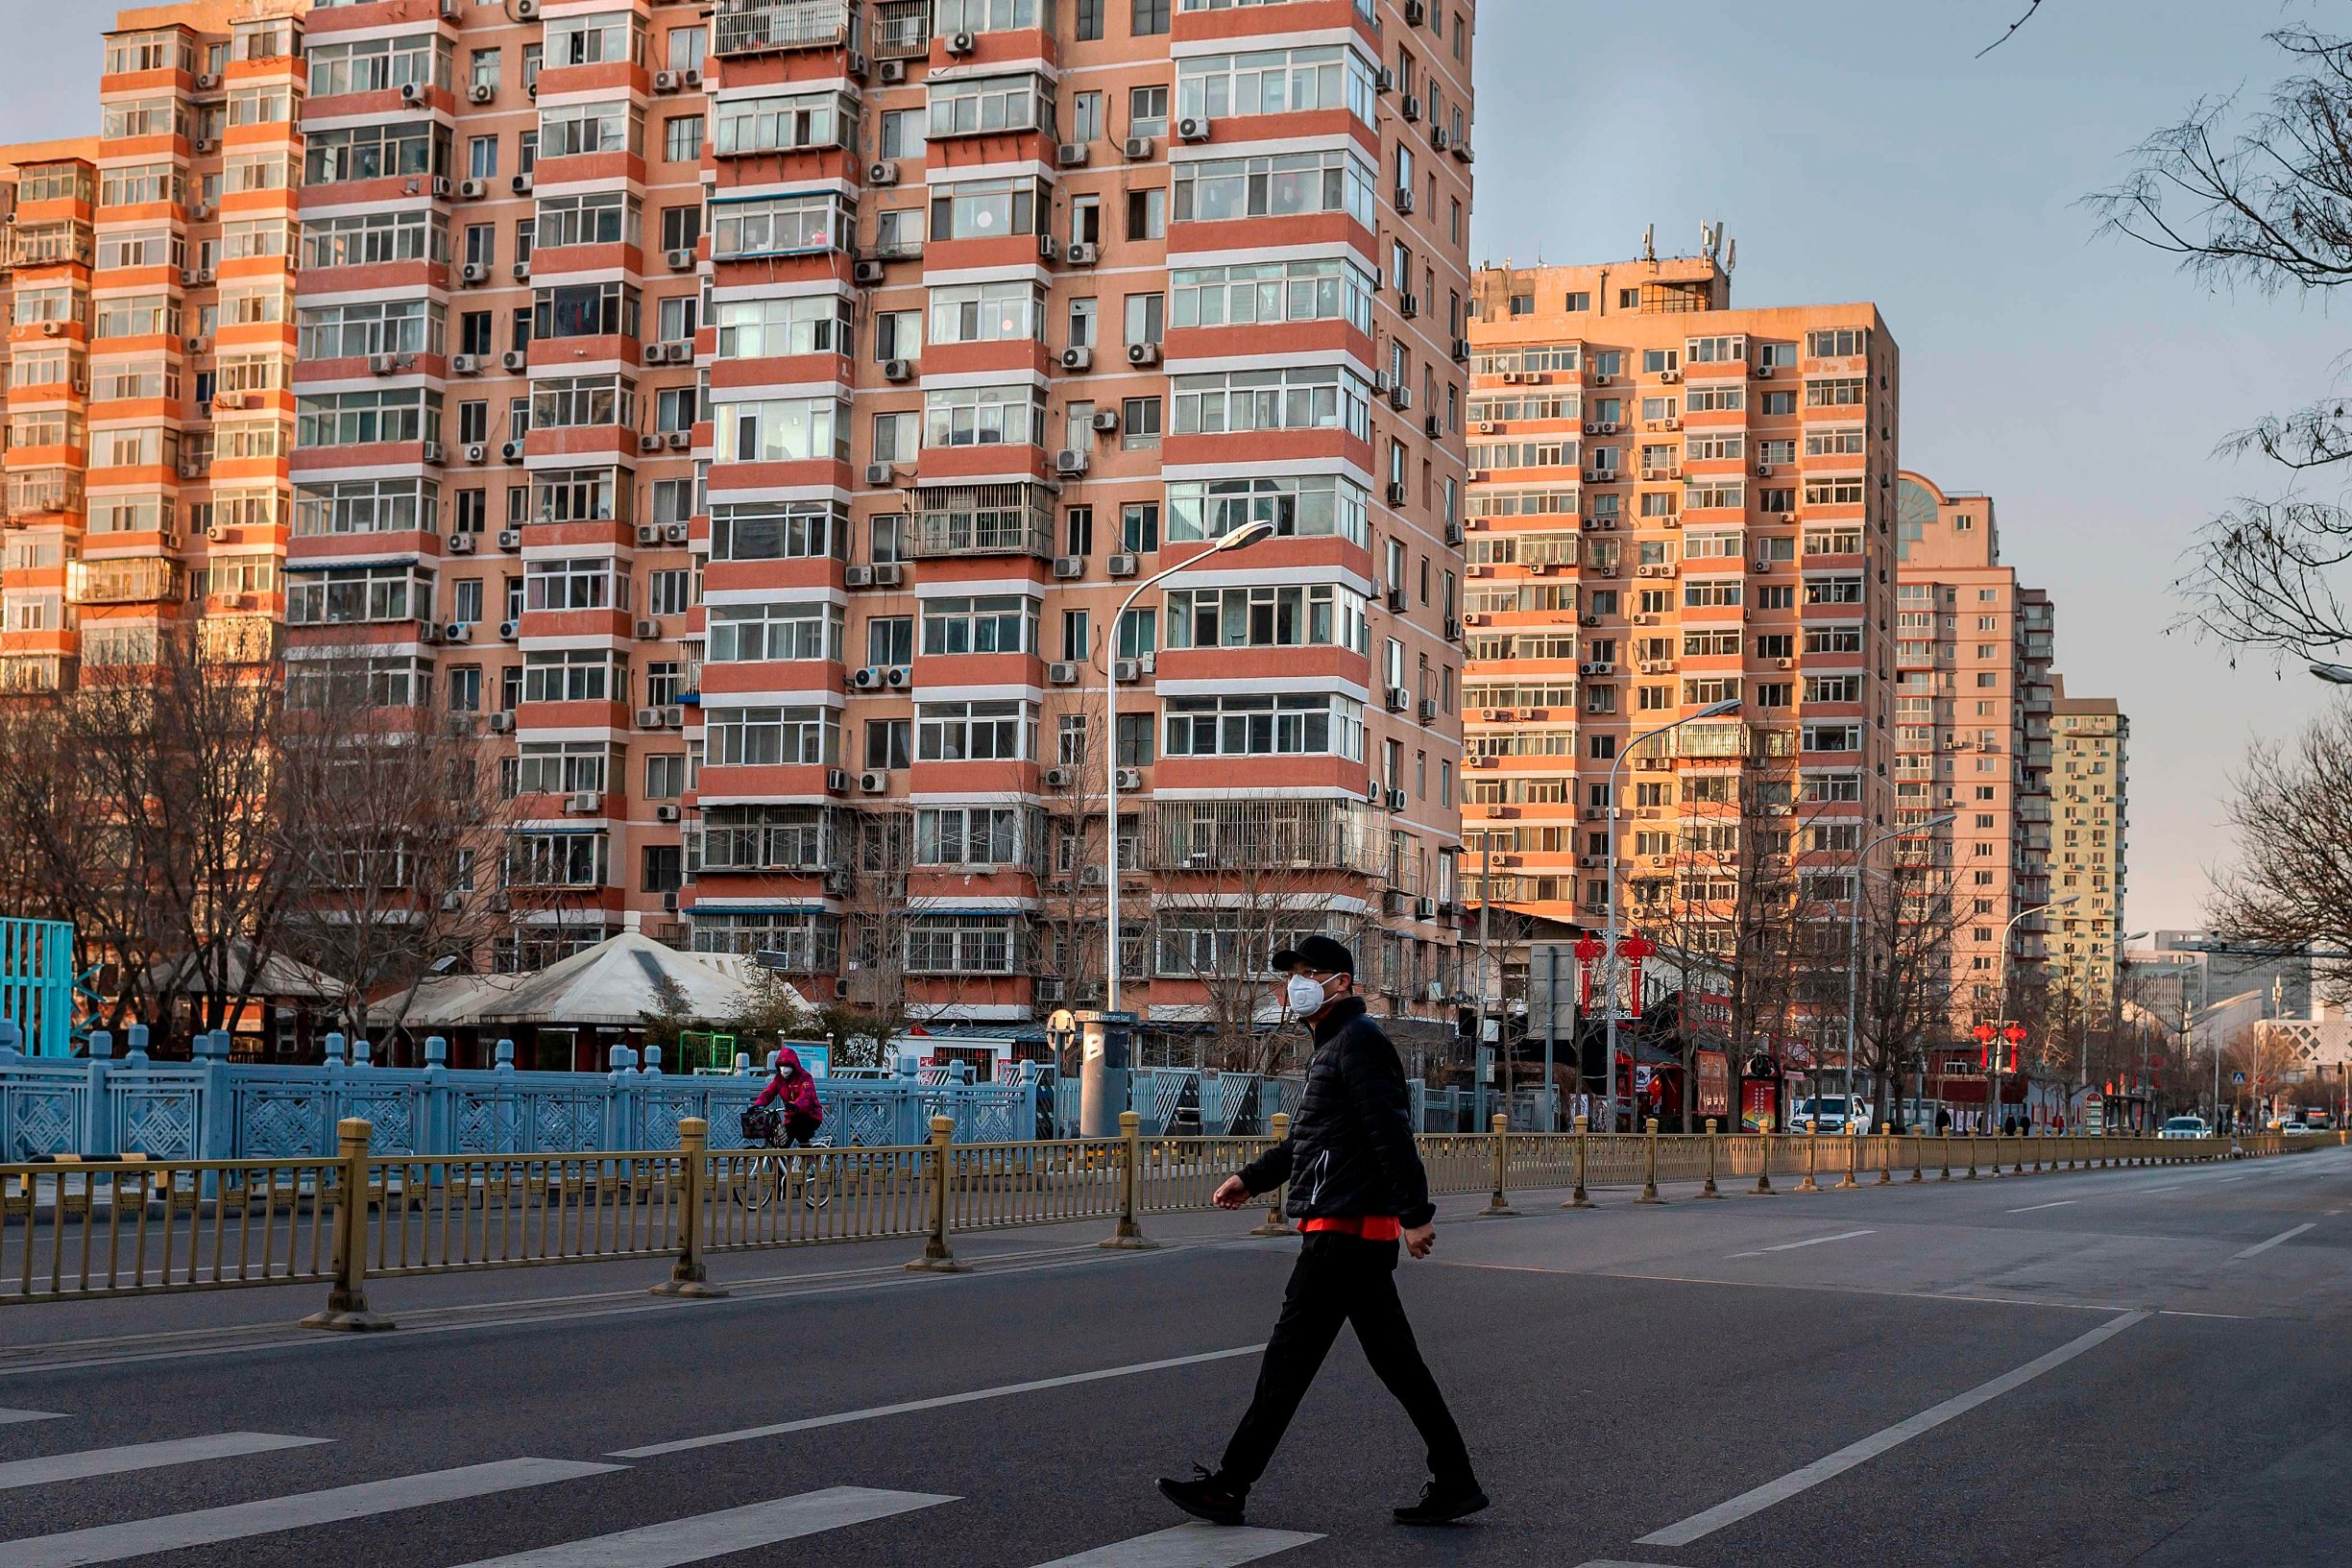 A man wearing a protective mask walks along an empty street in Beijing on January 31, 2020, following a SARS-like virus outbreak which began in the Chinese city of Wuhan. - The World Health Organization declared an international emergency after China's National Health Commission said nearly 8,000 people had been infected, and about 100 cases were reported outside China. (Photo by NICOLAS ASFOURI / AFP)